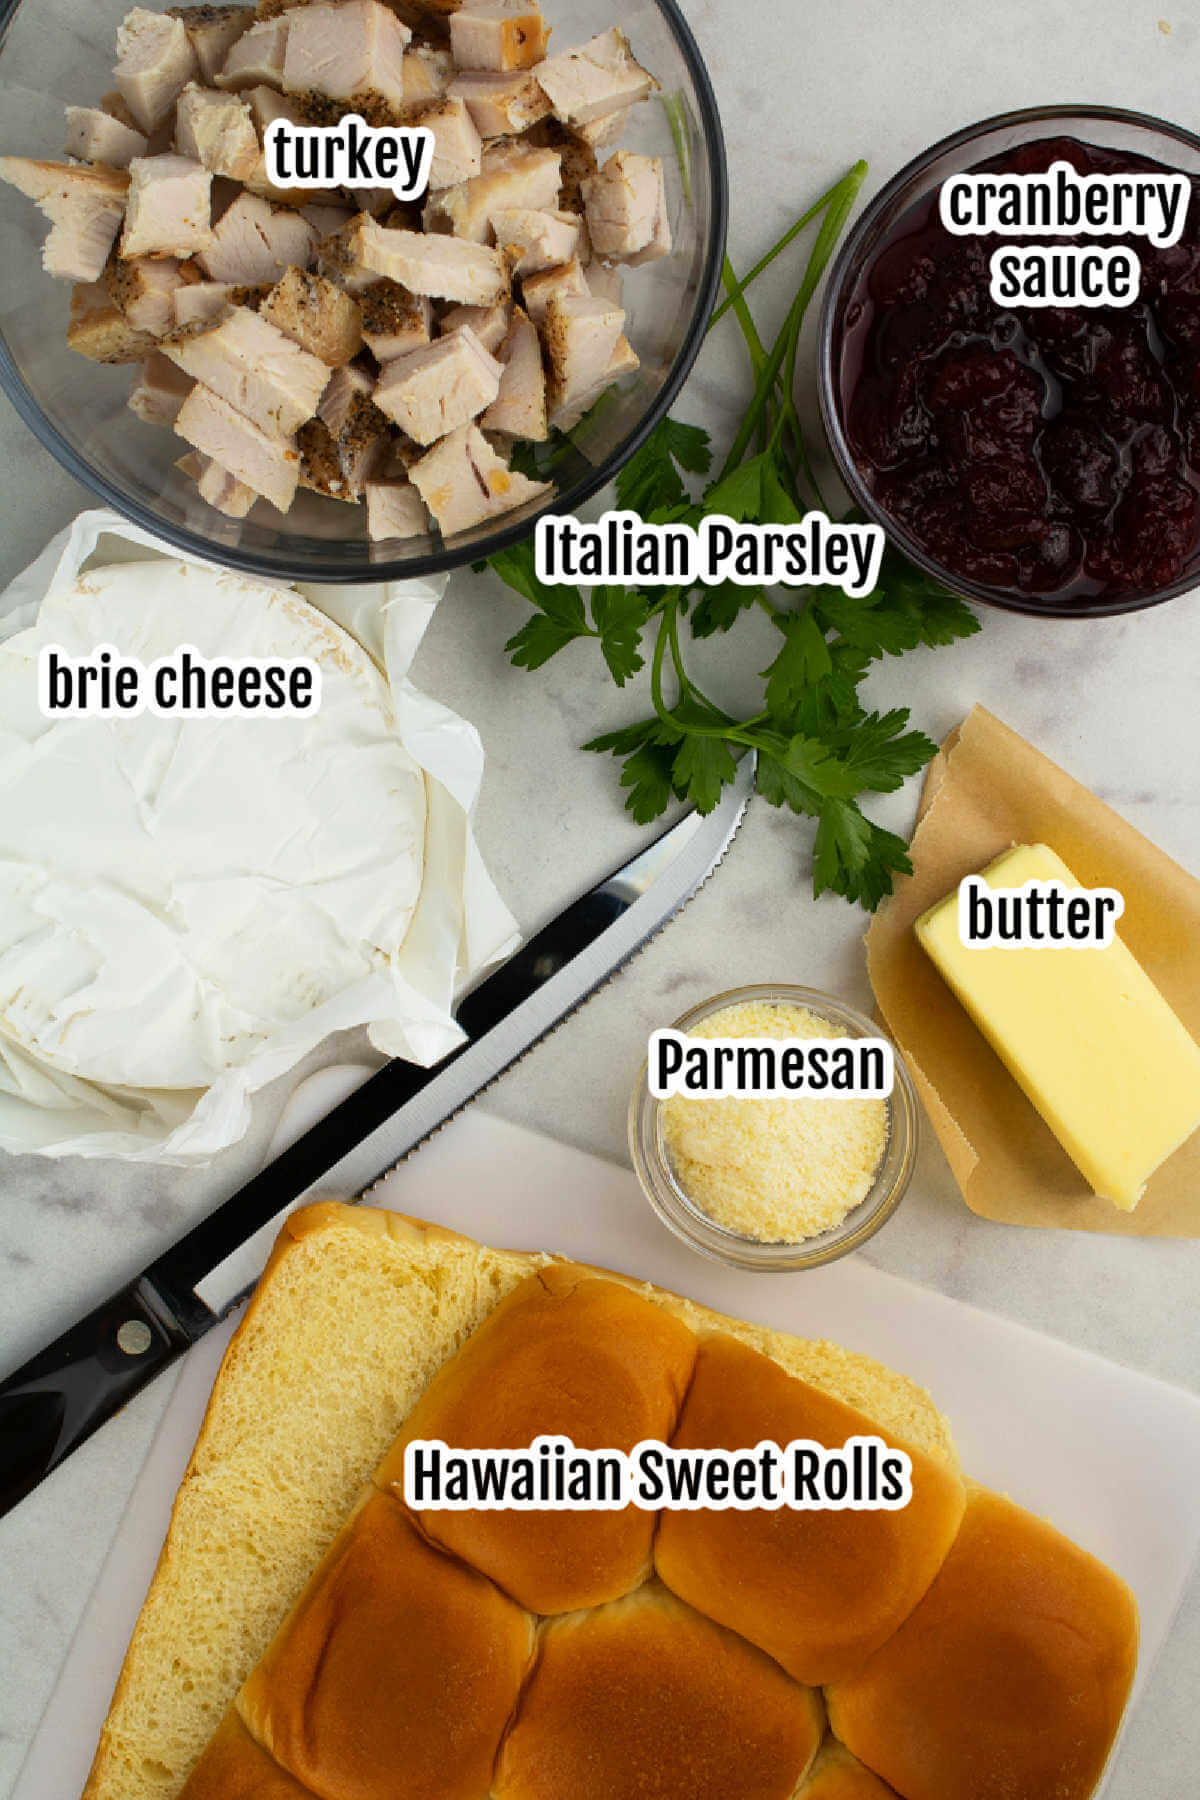 Image of ingredients needed to make leftover turkey sliders with cranberry sauce and brie cheese. 